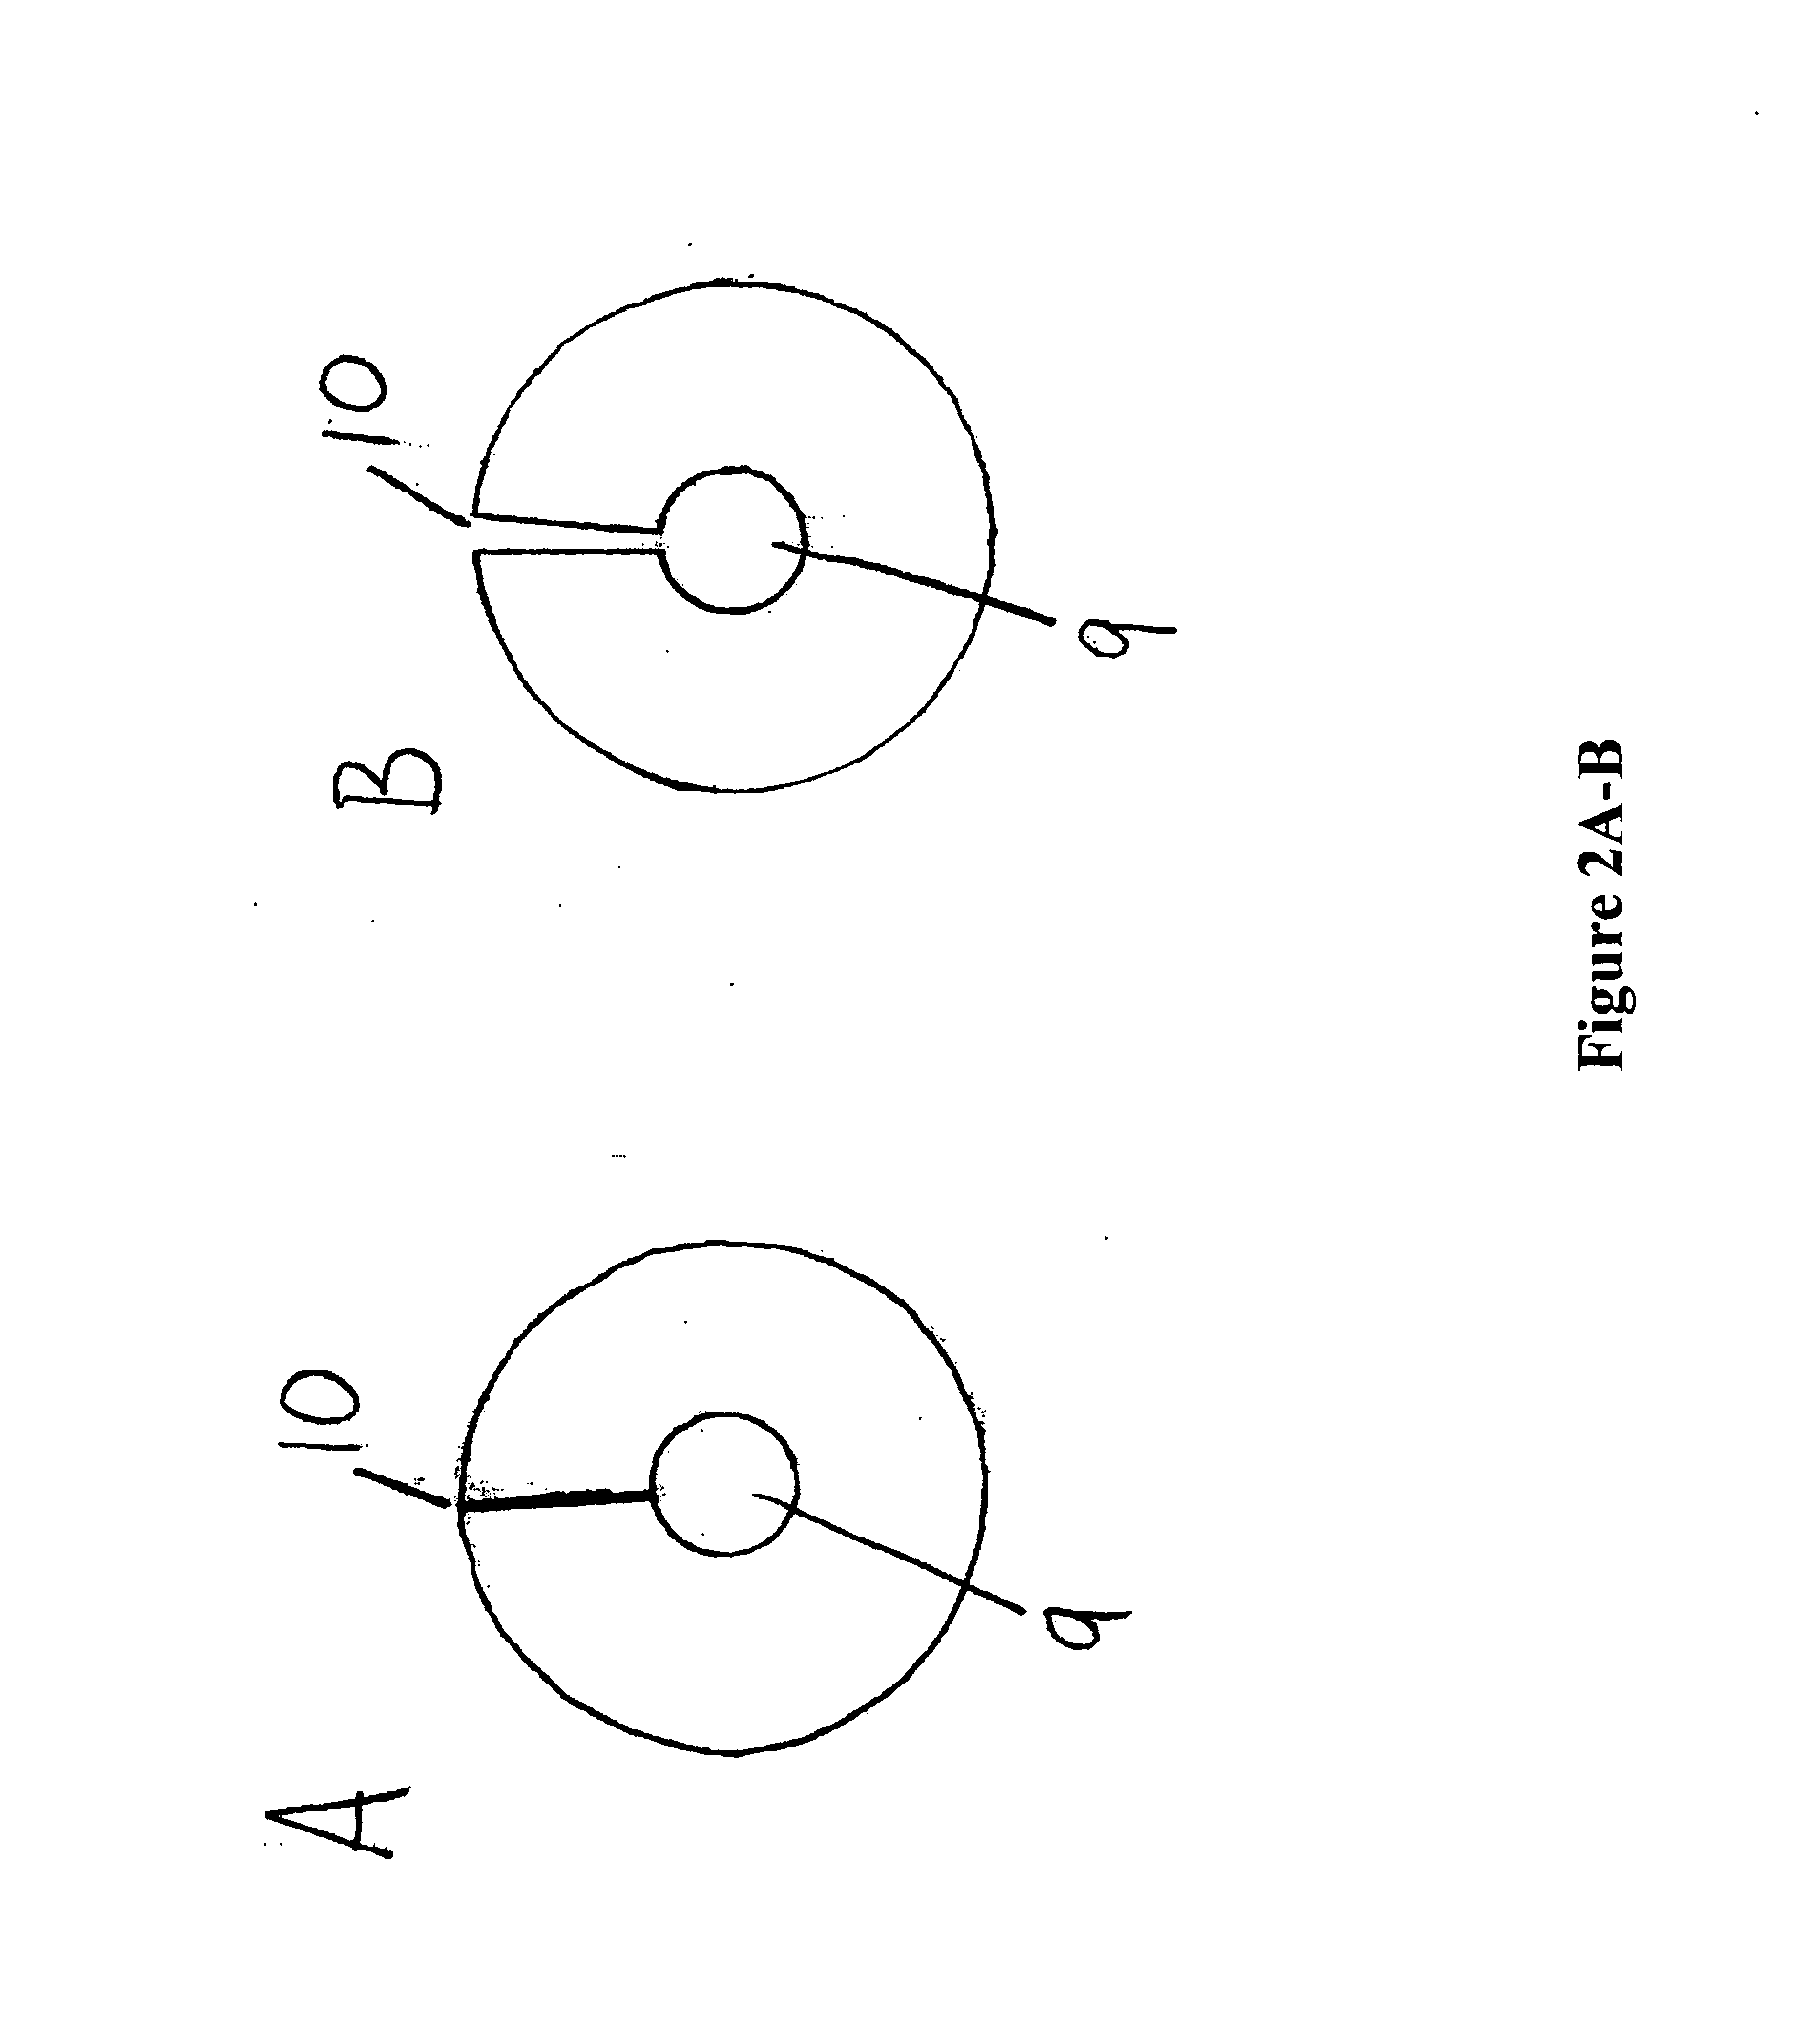 Infusion catheters with slit valves and of simplified construction